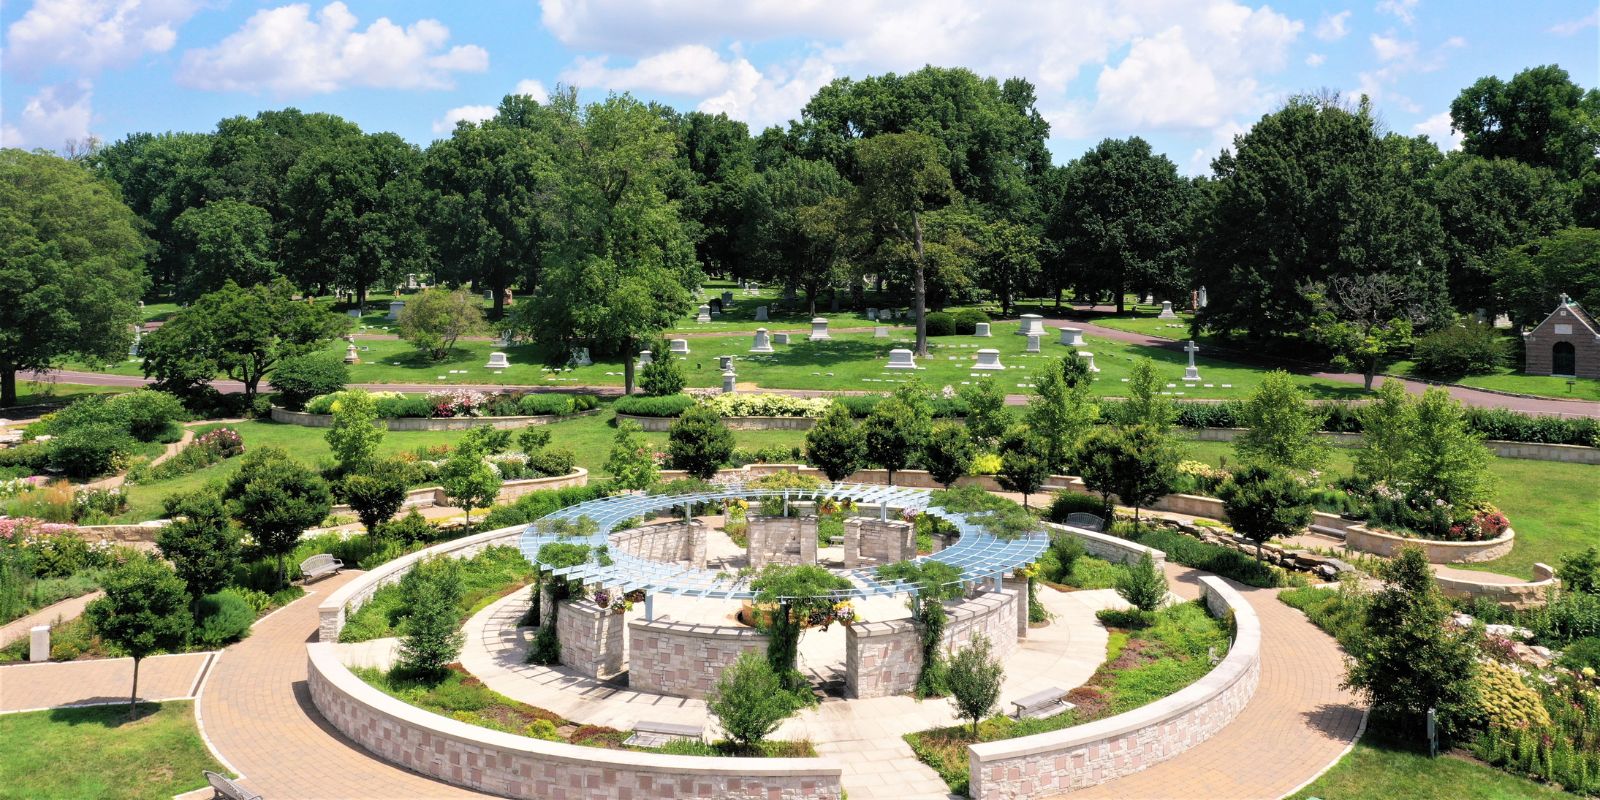 In North County, visitors can explore off-the-beaten-path attractions such as Bellefontaine Cemetery and Arboretum.